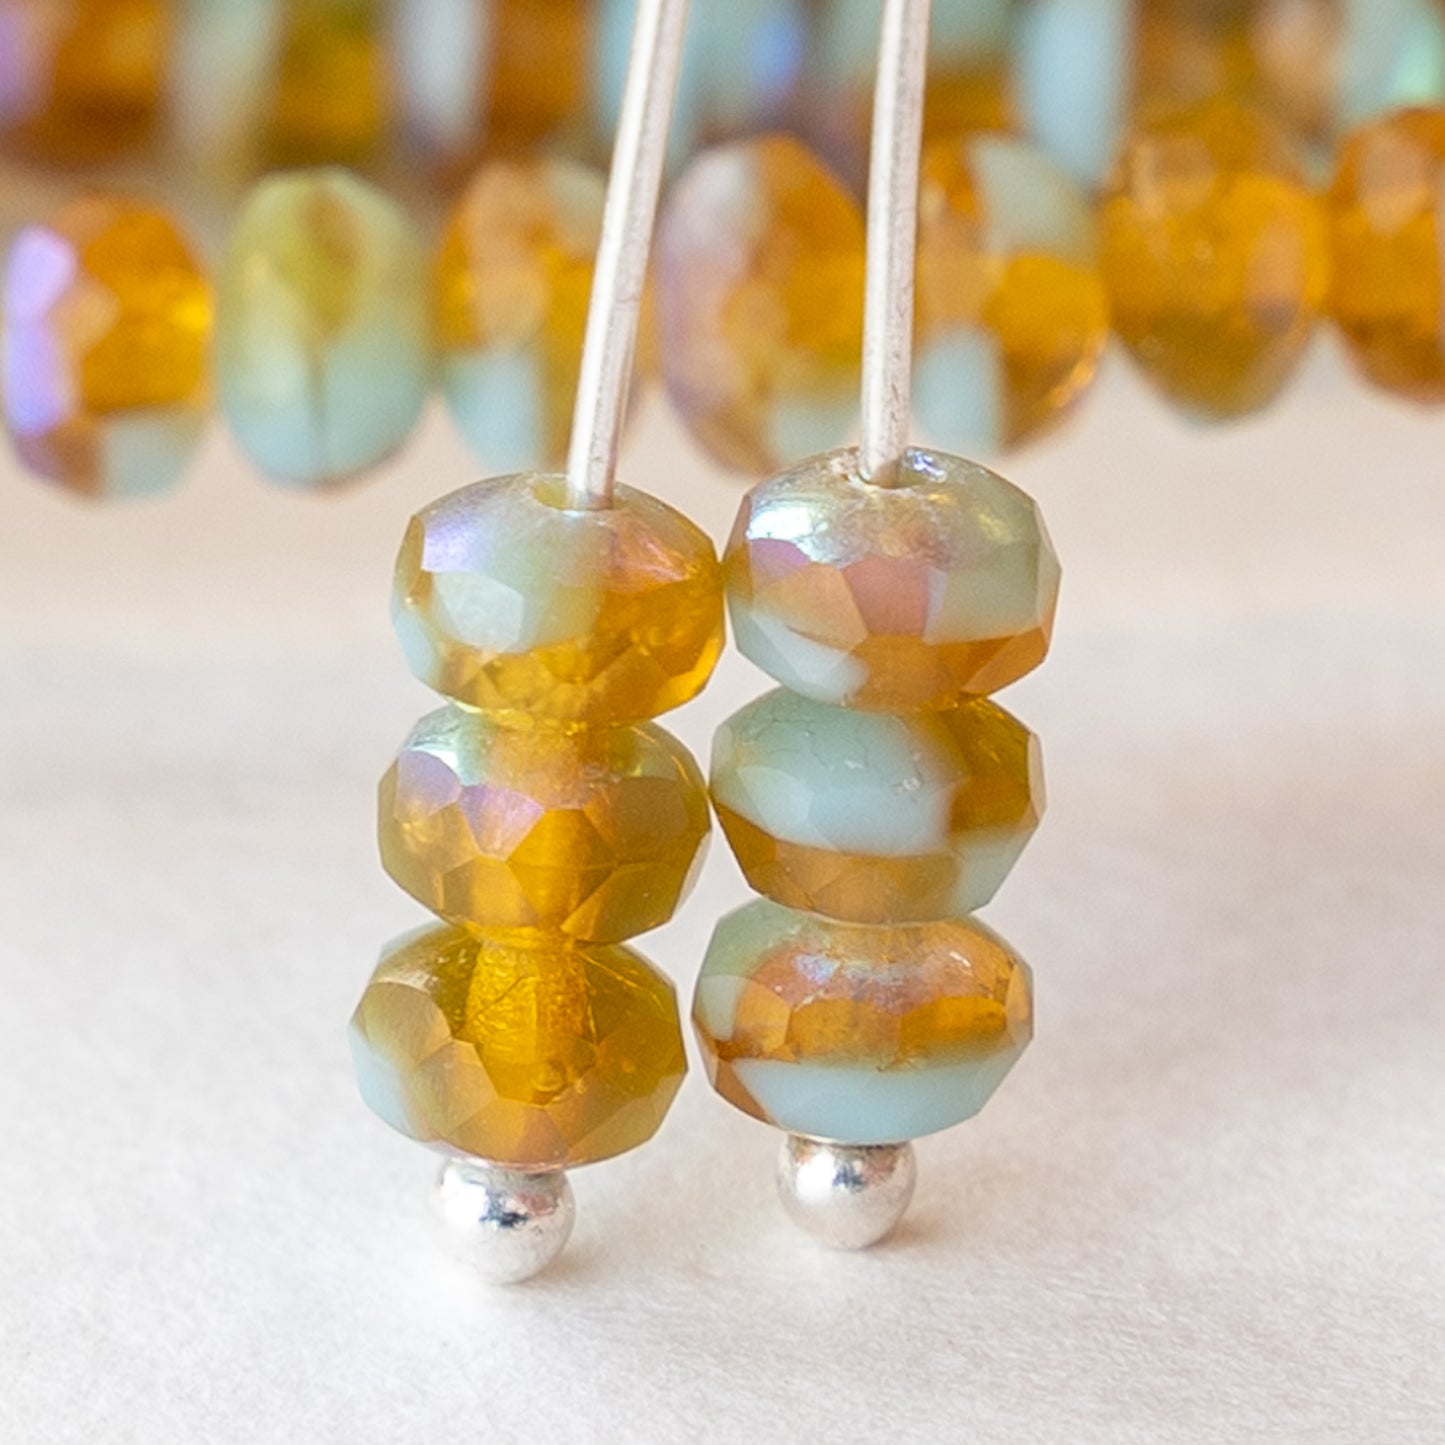 Load image into Gallery viewer, 3x5mm Firepolished Rondelles - Light Amber and Seafoam - 37 Beads
